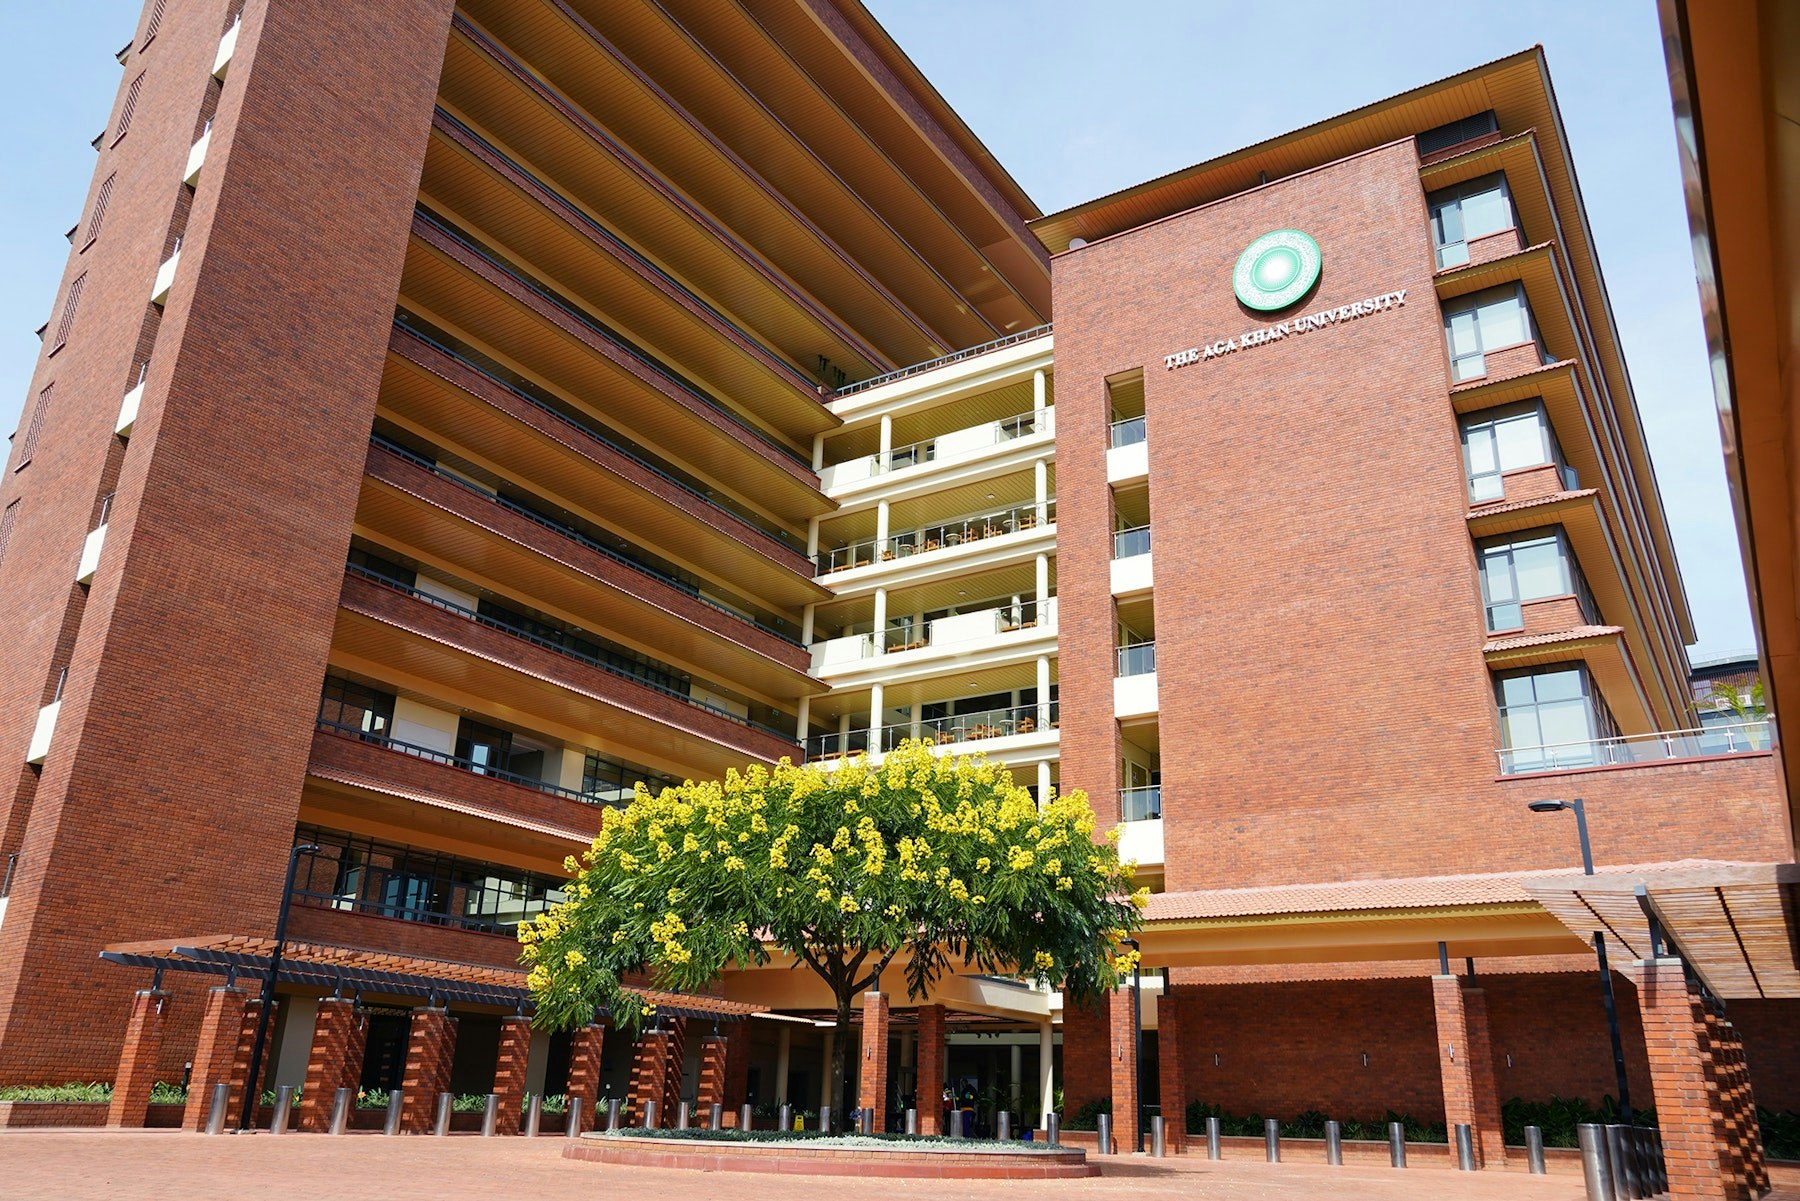 Buildings account for nearly 40 percent of all greenhouse gas emissions. The Aga Khan University Centre in Nairobi achieved IFC EDGE Advanced certification for its sustainability features that include 40 percent energy savings compared to conventional construction.